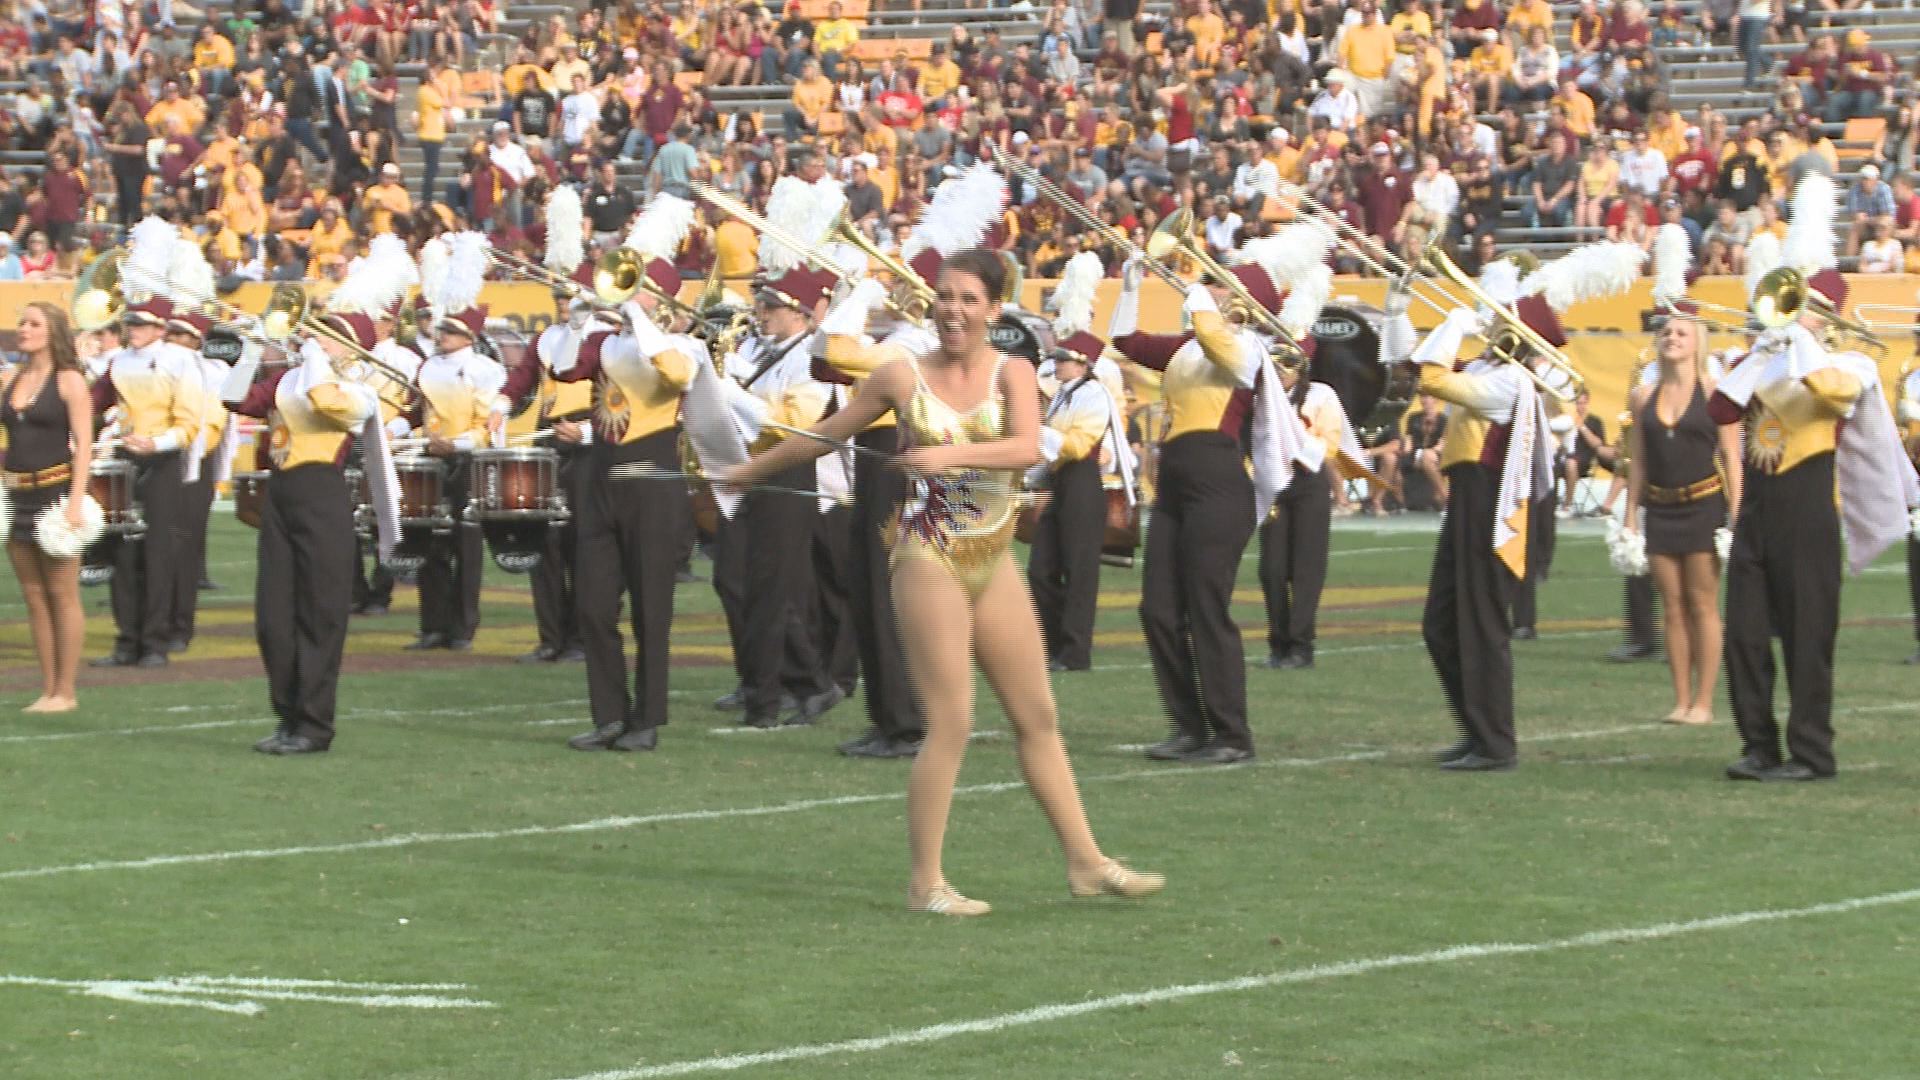 Calling ASU Marching Band Alumni Time to suit up again